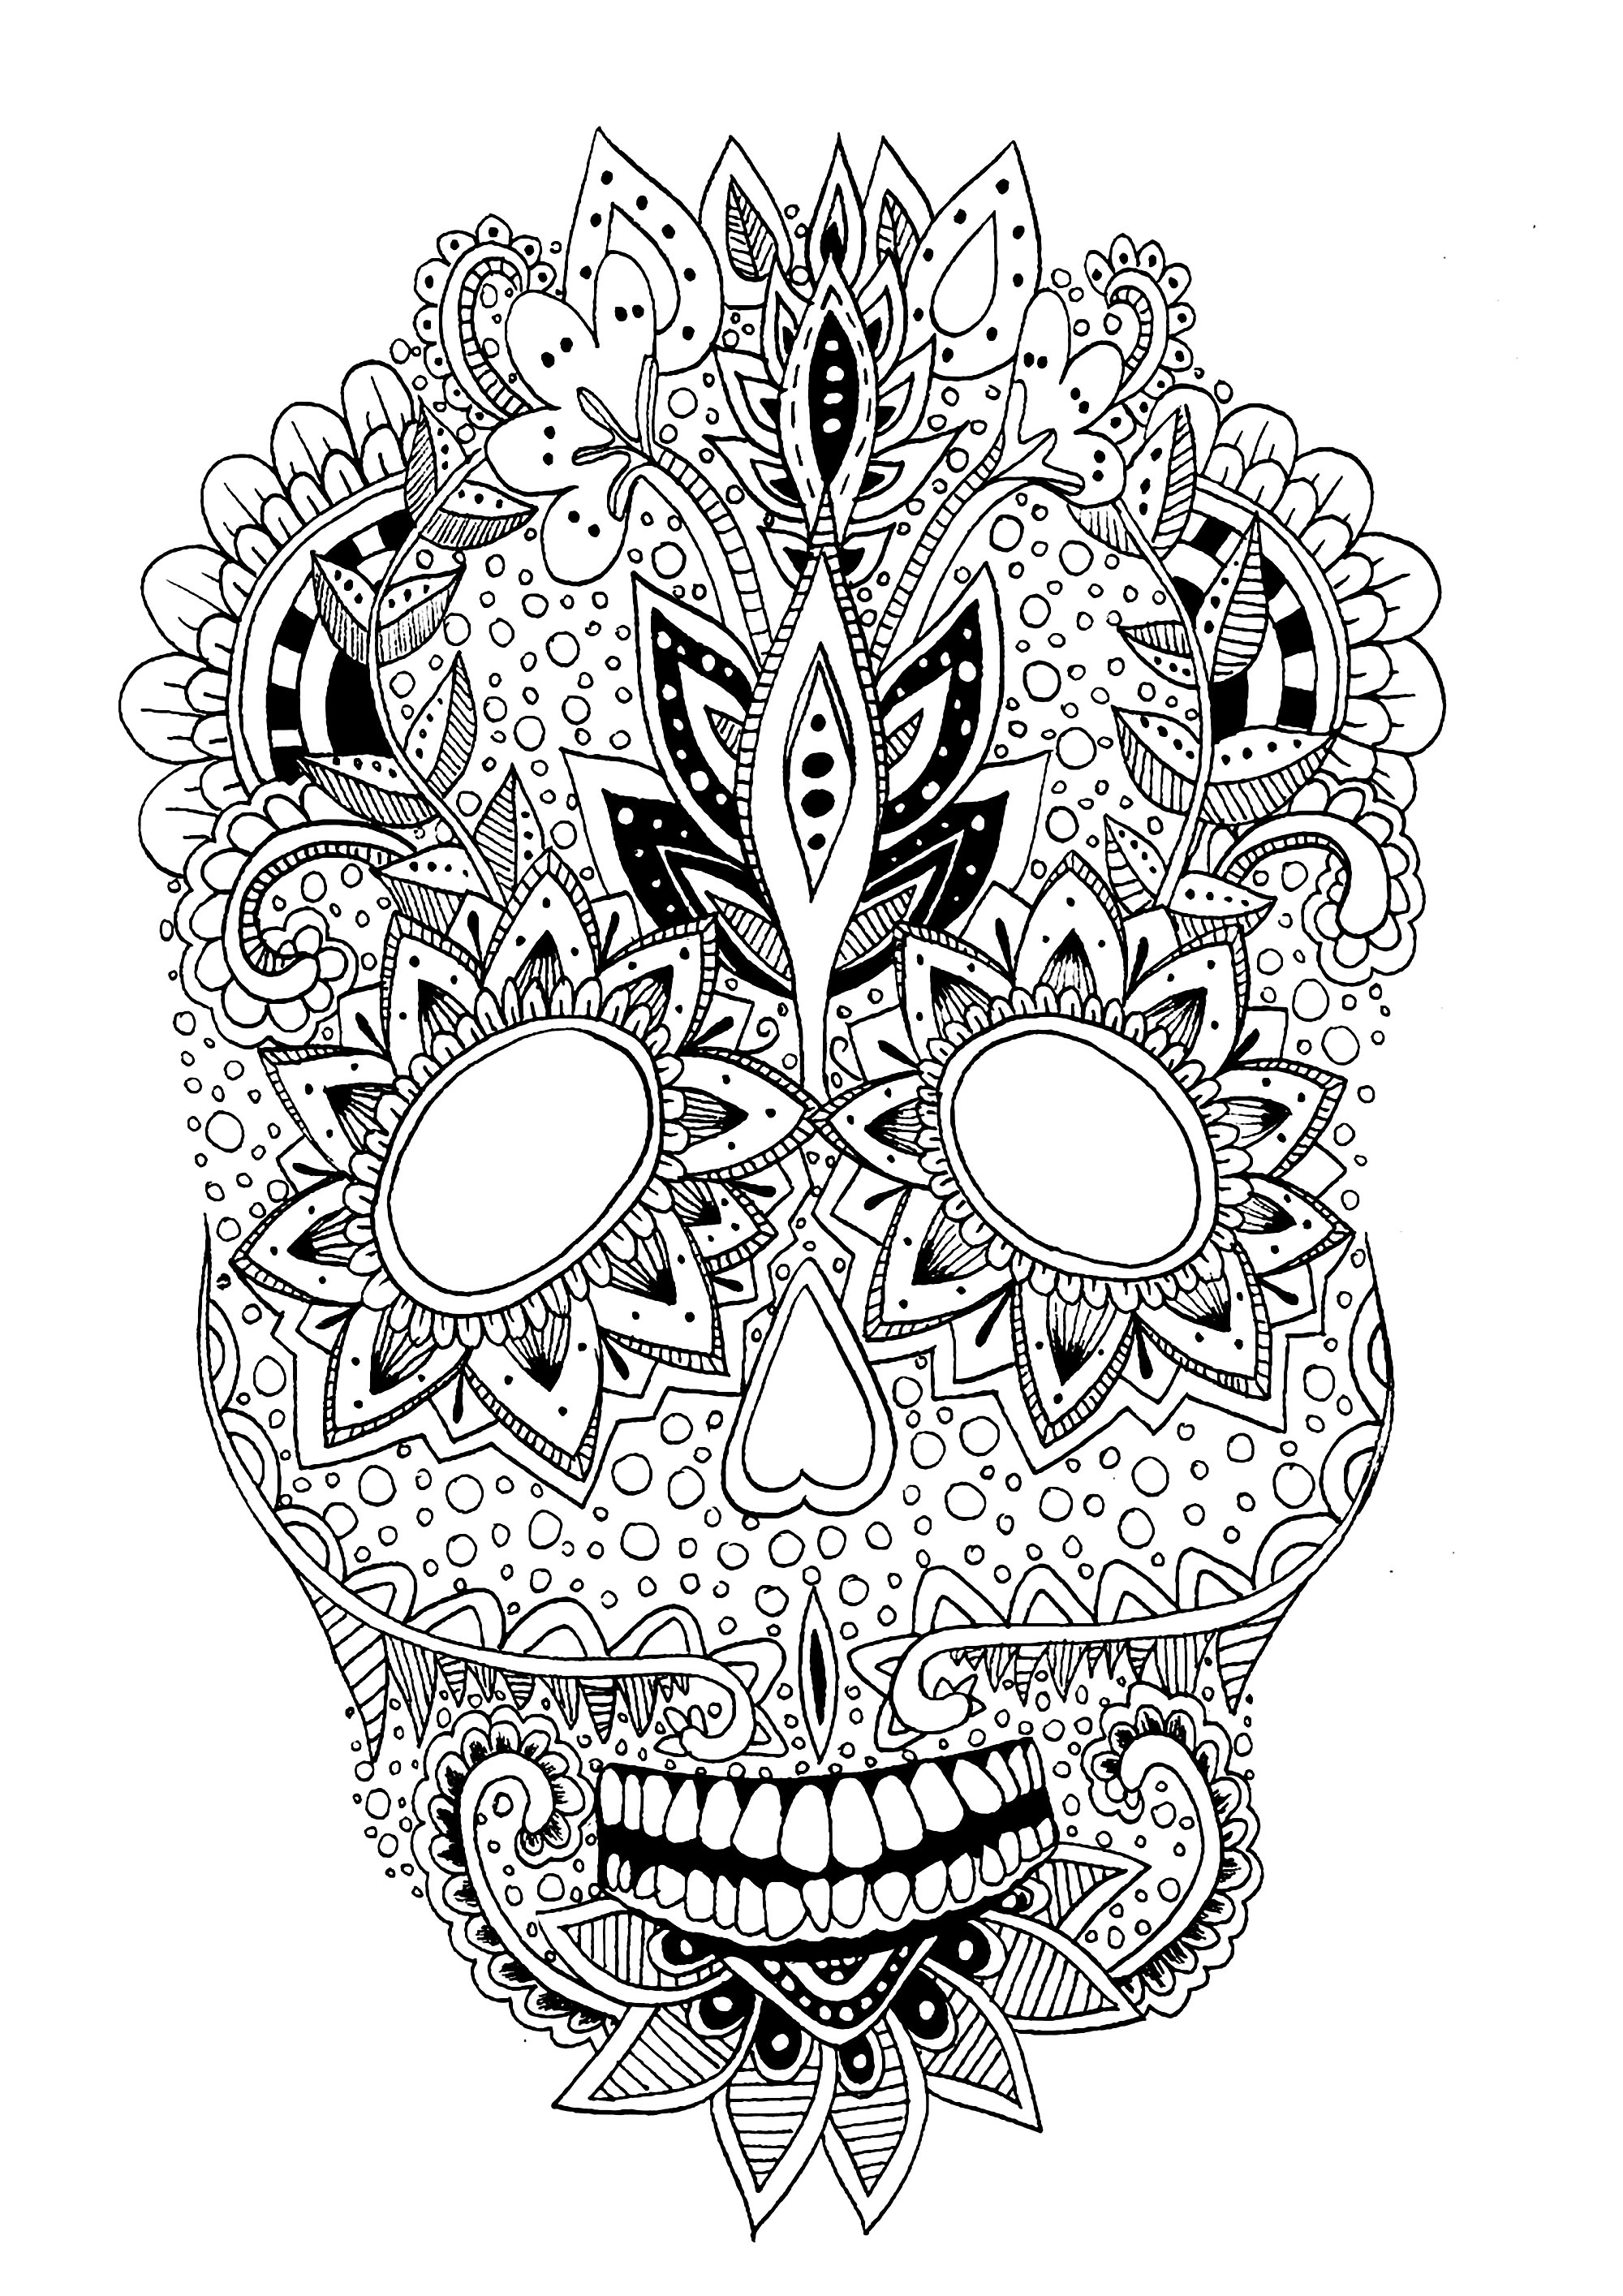 An original skull for a relaxing moment with a coloring page, Artist : Rachel